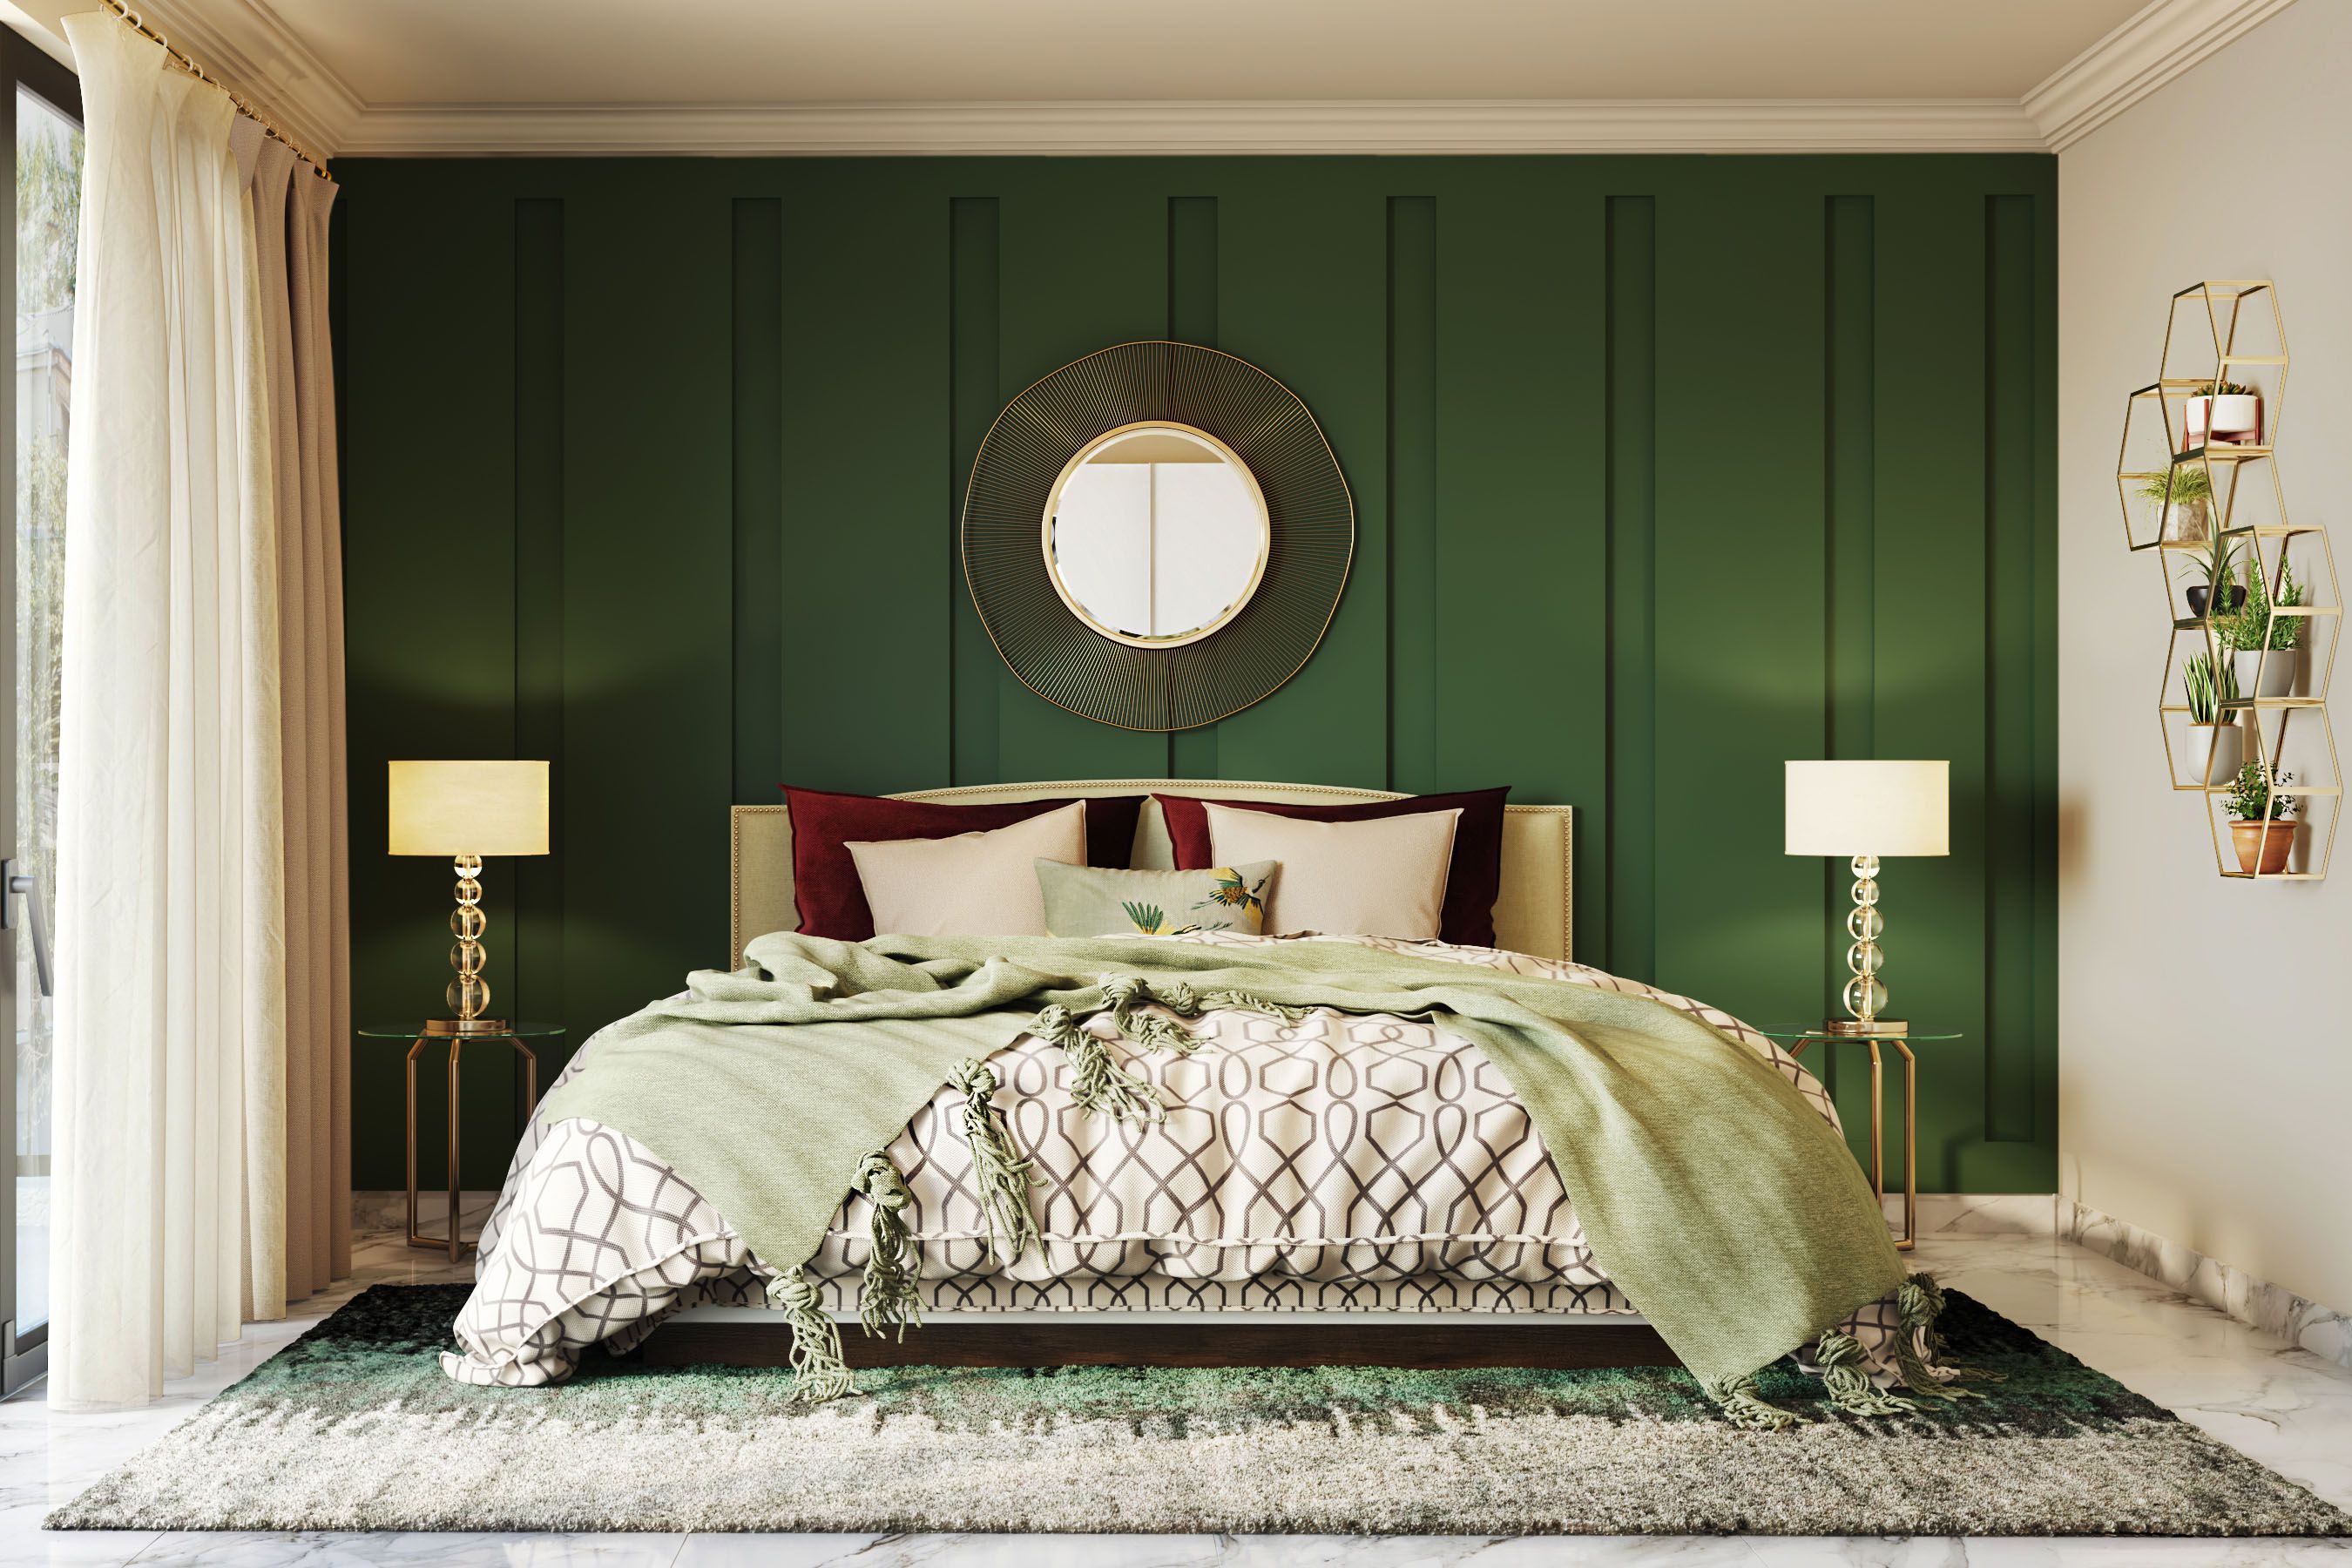 Modern Dark Green Bedroom Wall Paint Design With Grooves